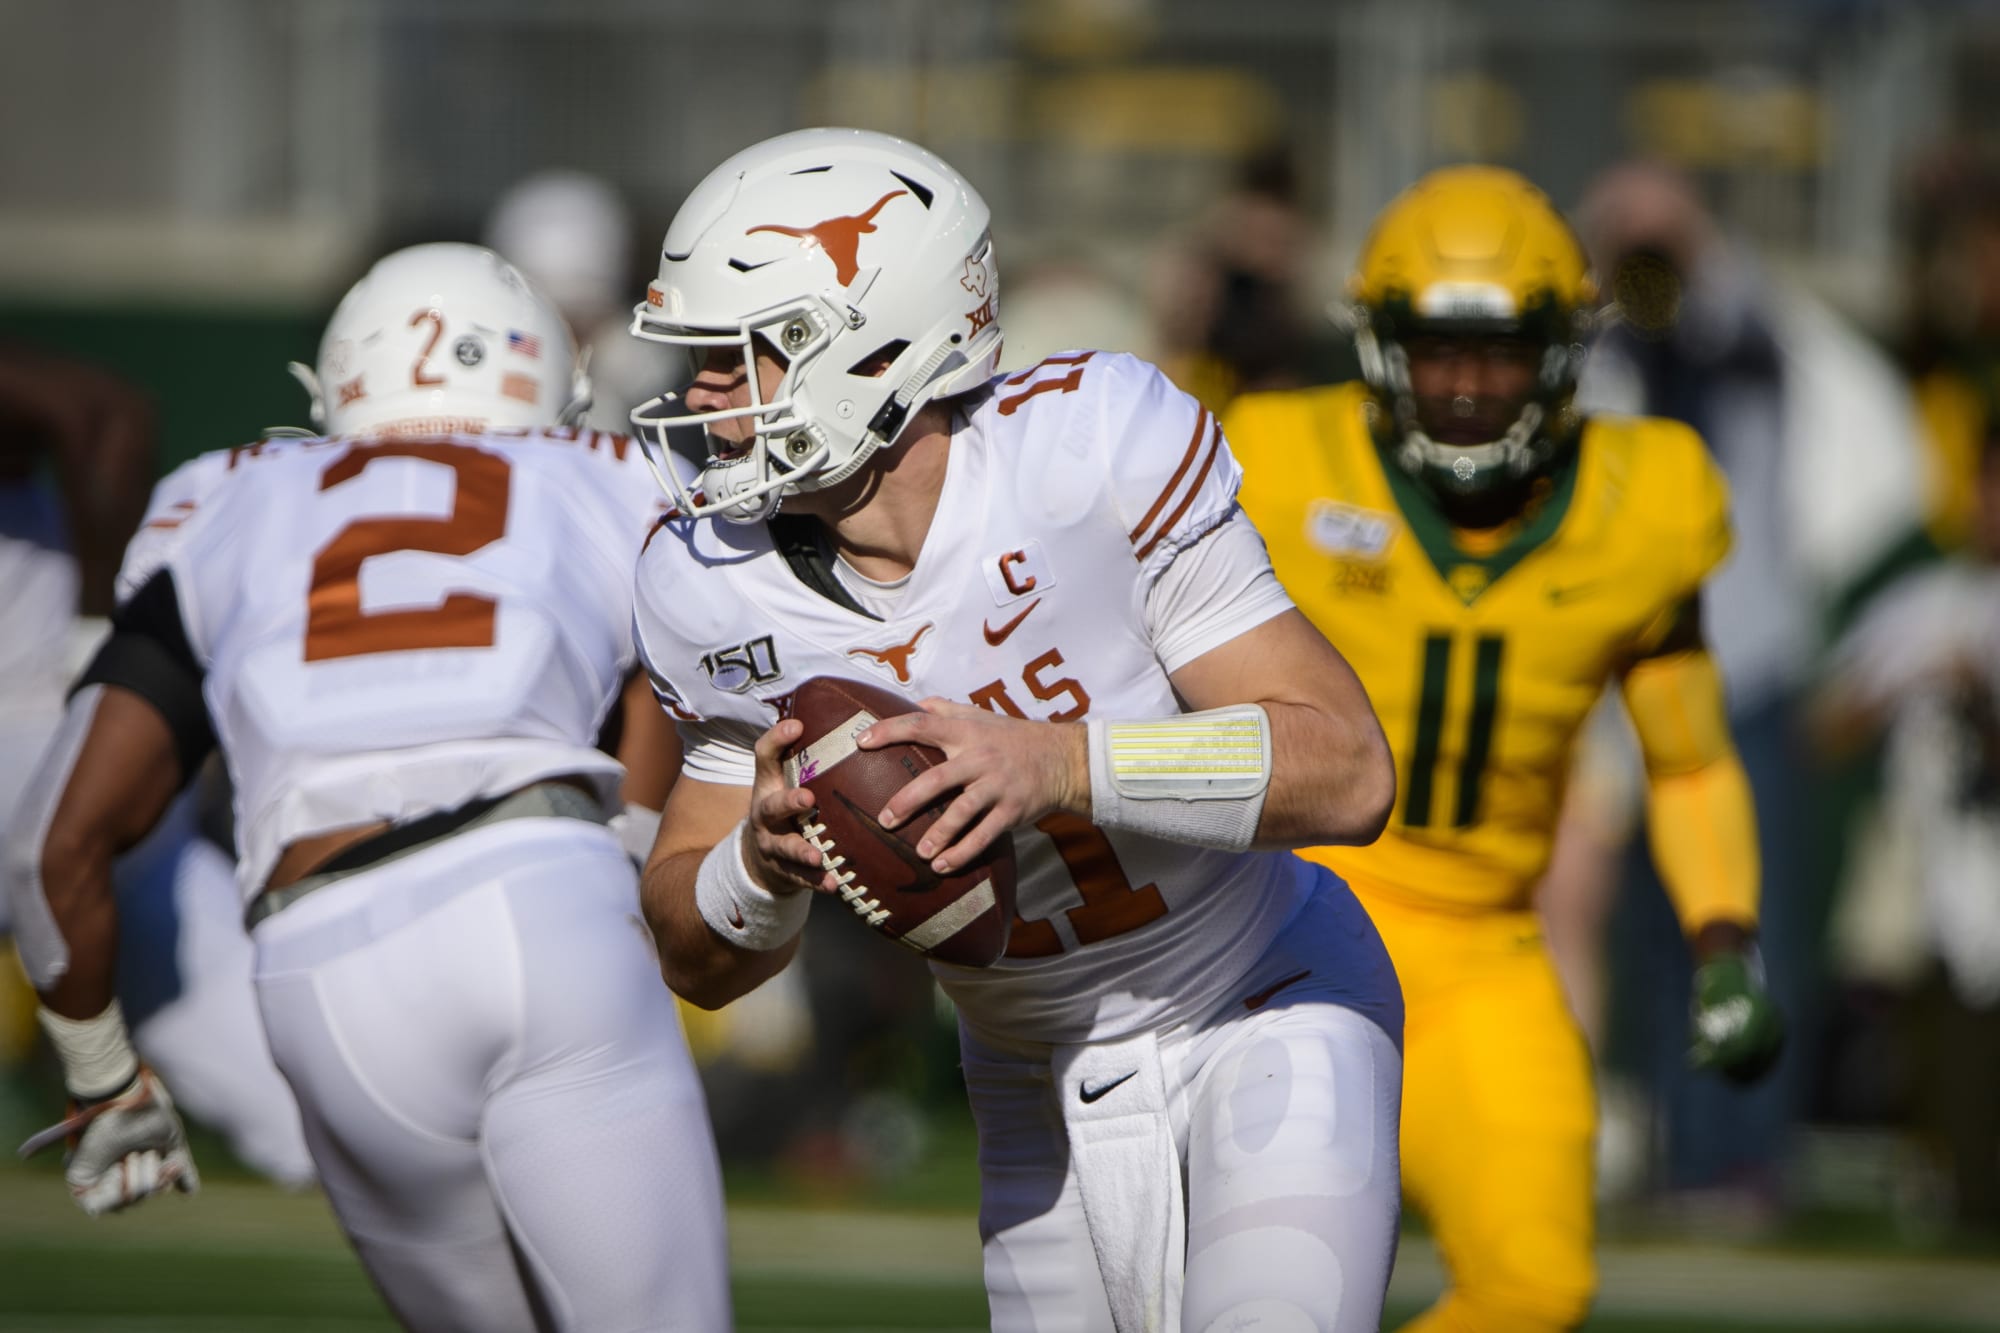 Texas Longhorns to Wear White Throwback Uniforms at Home - Texas